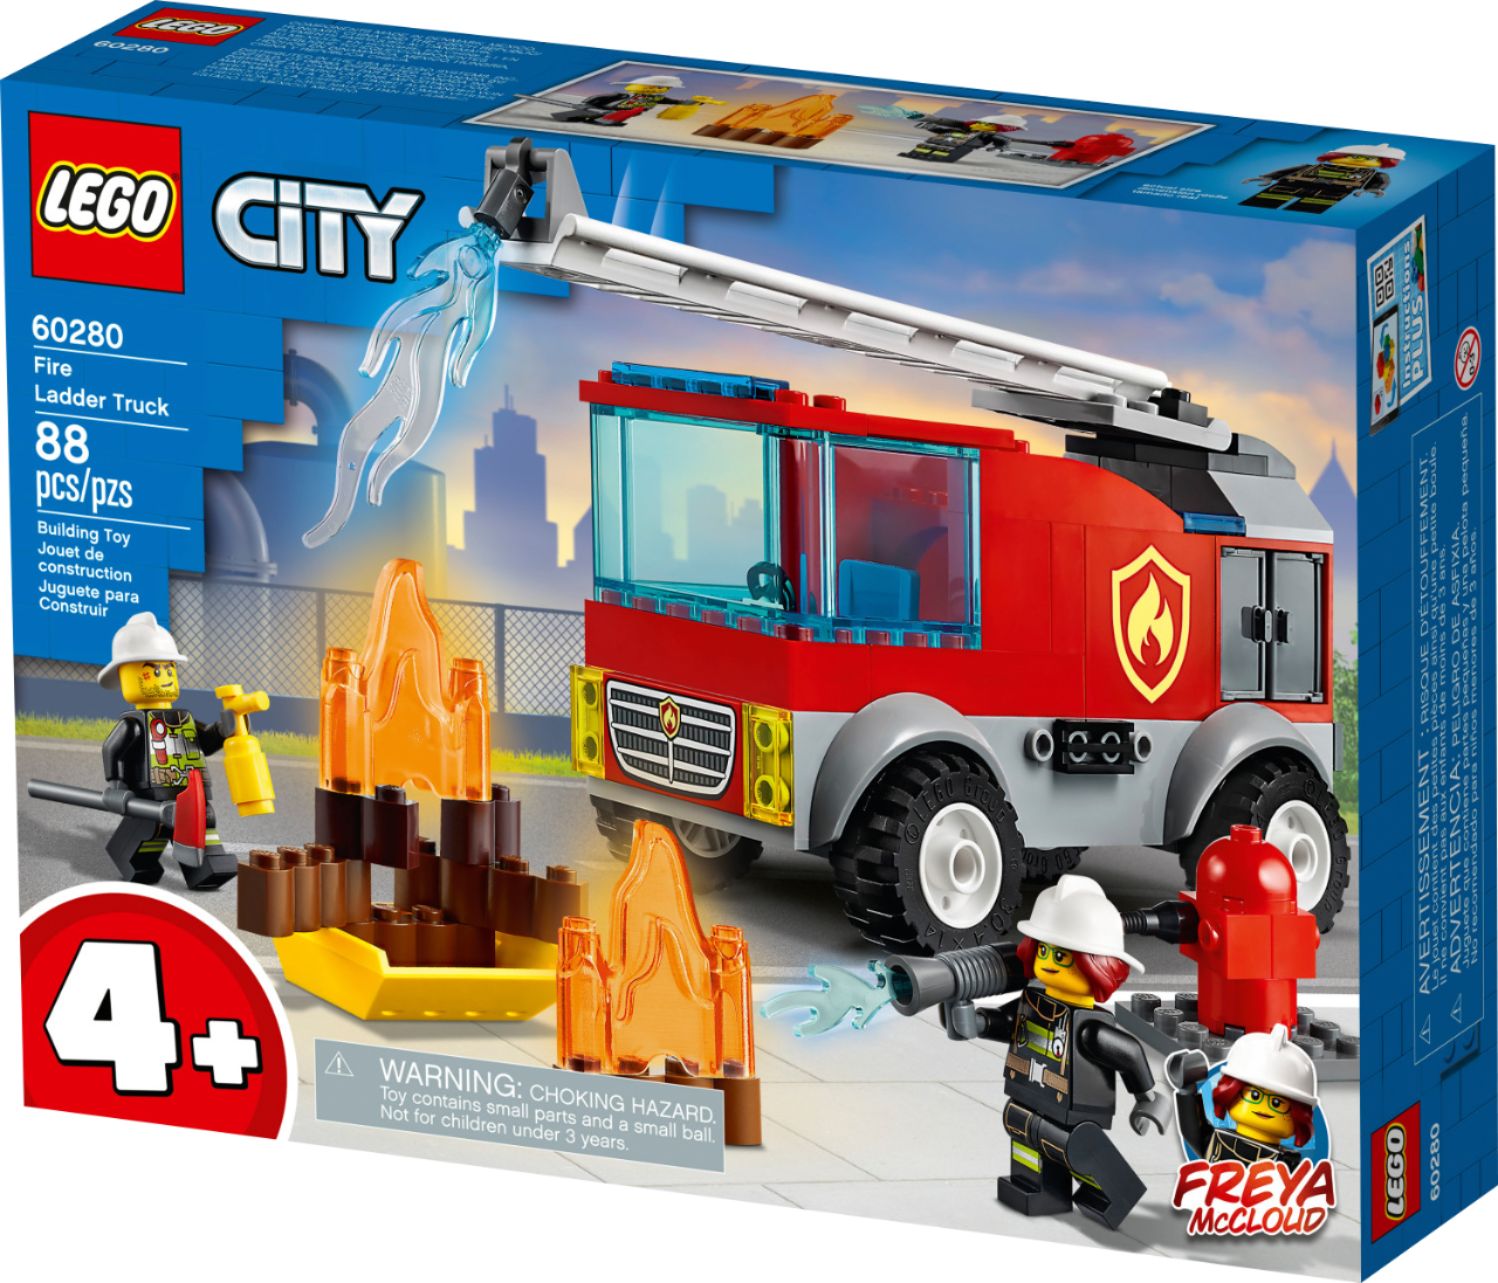 Angle View: LEGO - City Fire Ladder Truck 60280